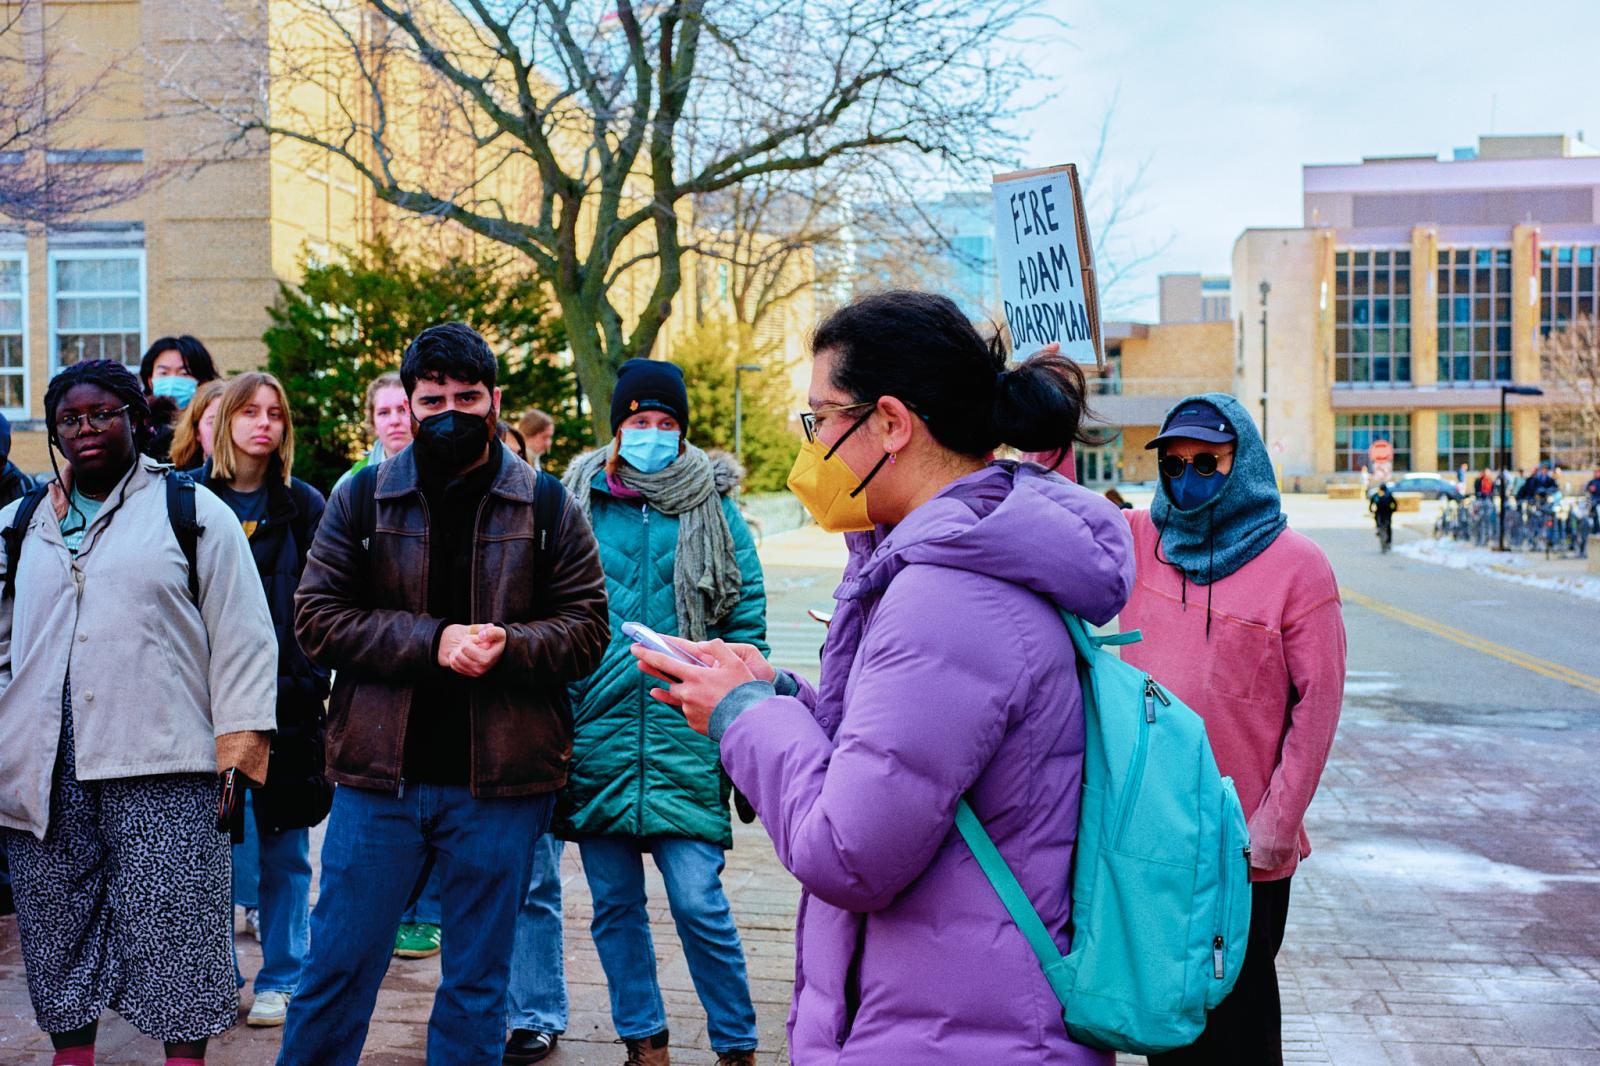 Speakout Against UWPD and Weapons Manufacturers on Campus - 